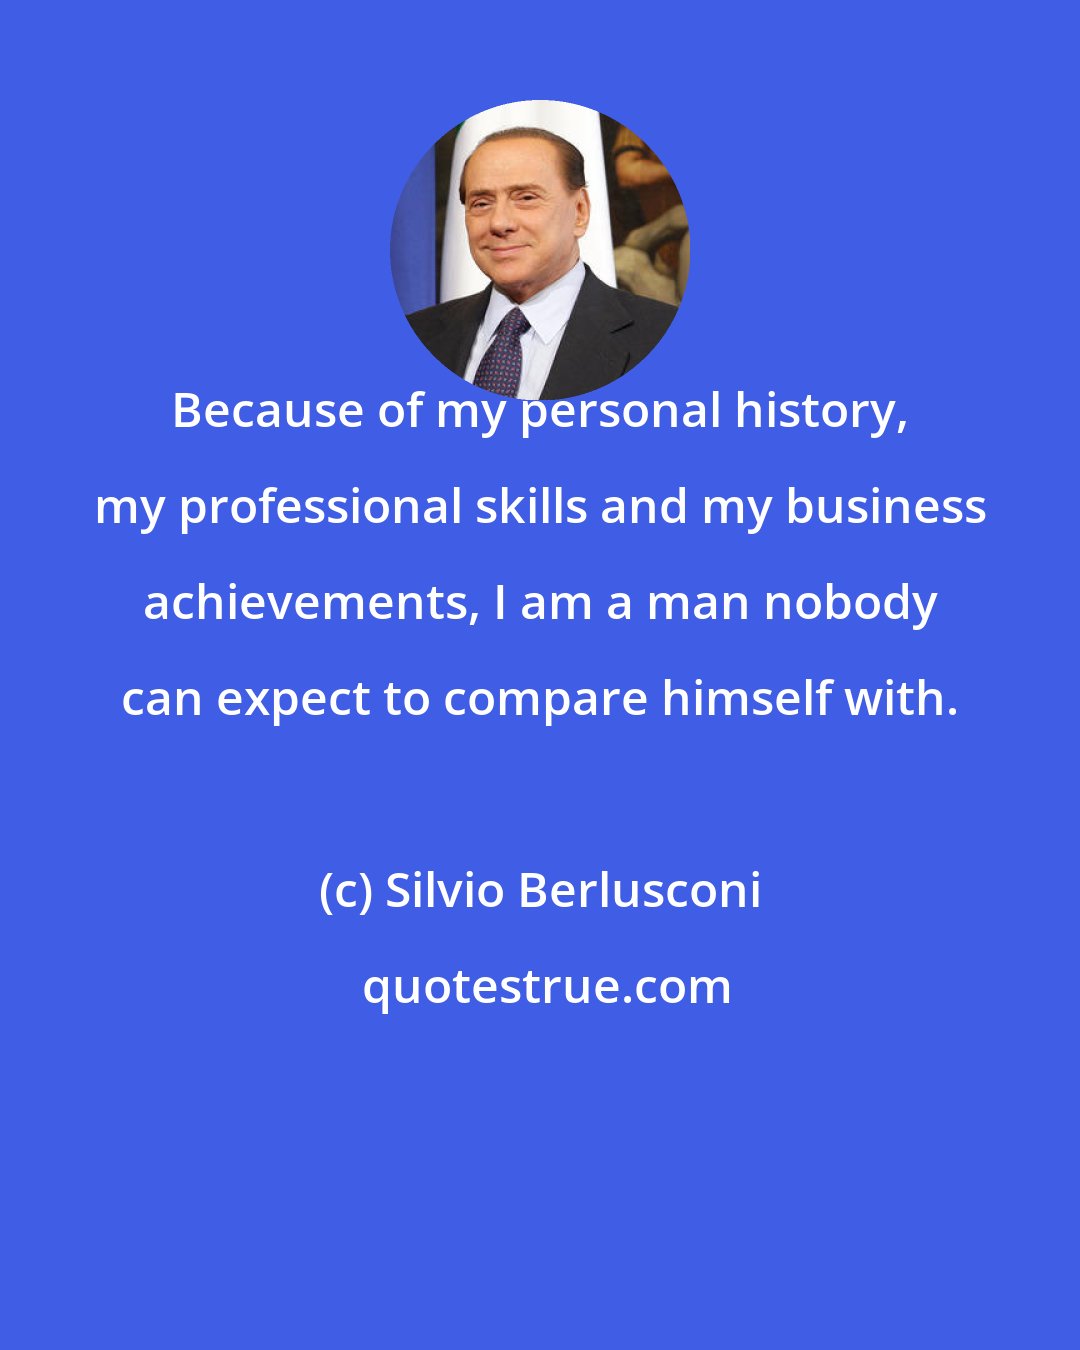 Silvio Berlusconi: Because of my personal history, my professional skills and my business achievements, I am a man nobody can expect to compare himself with.